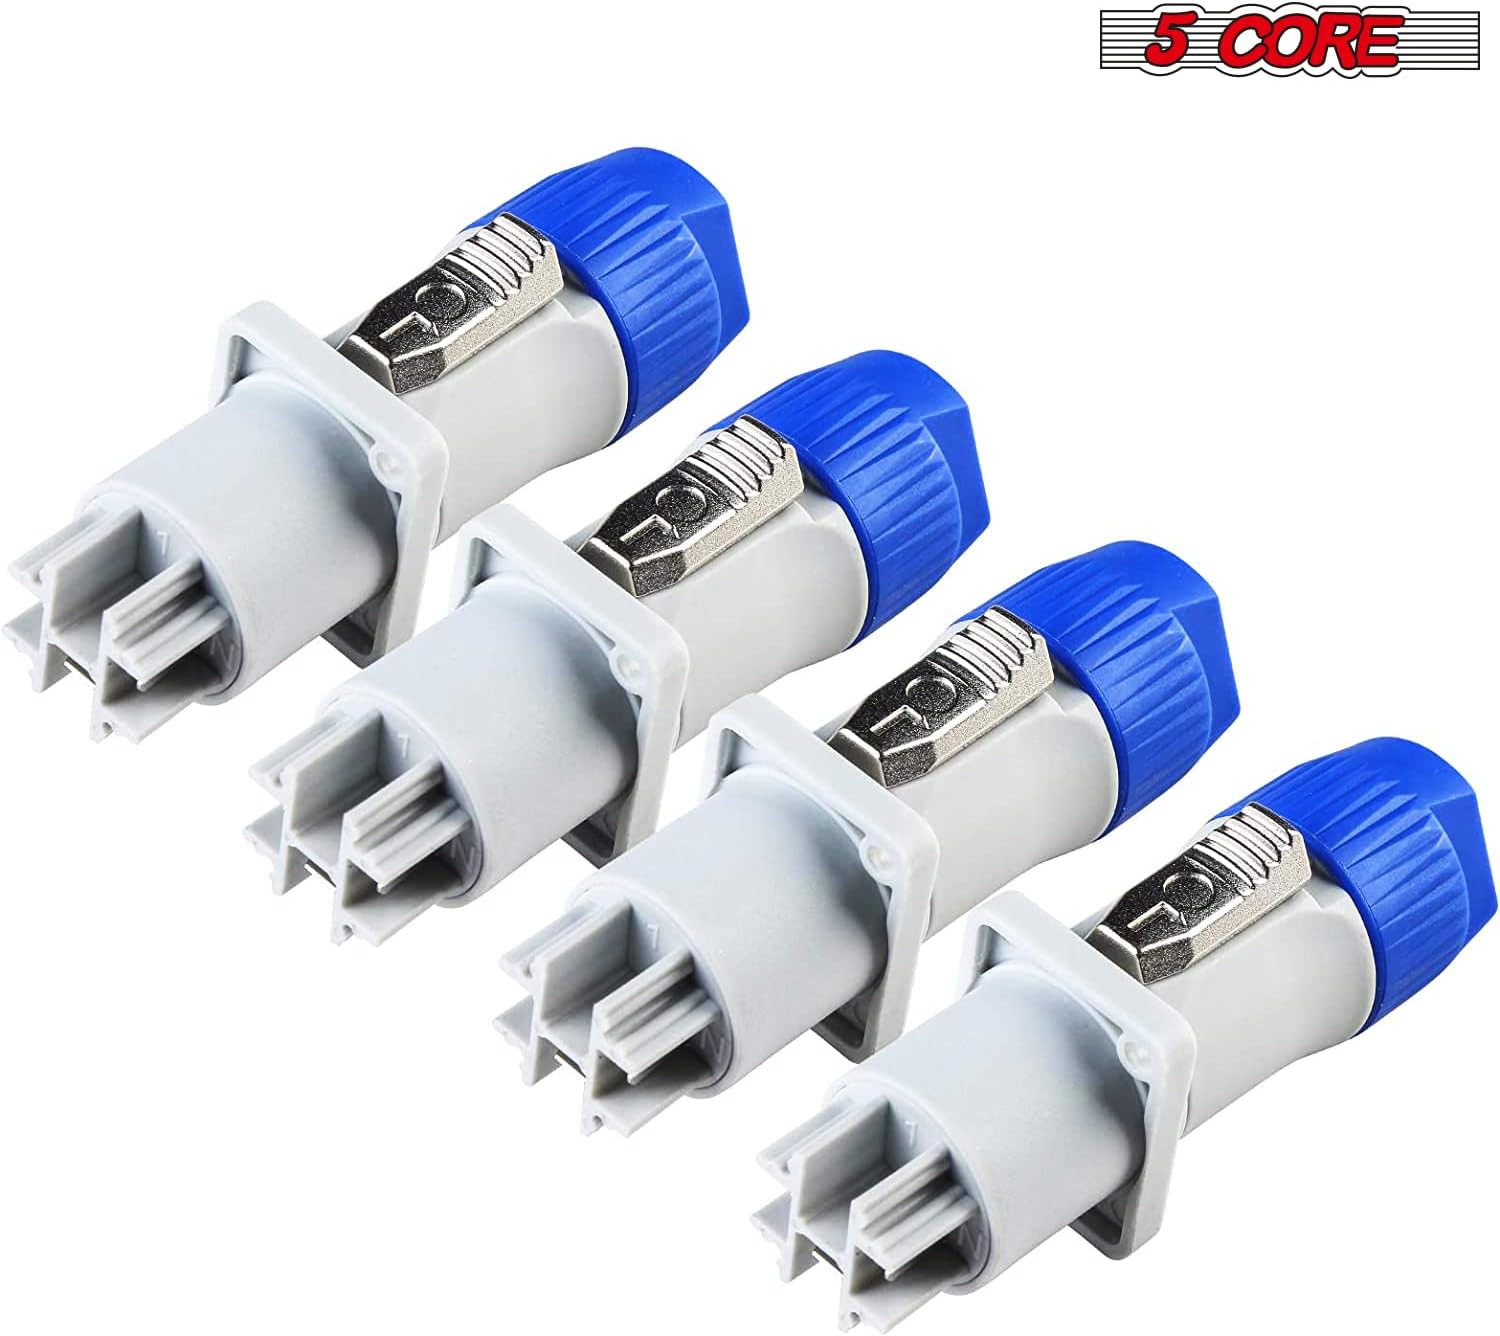 Copy of 5 CORE 4 Pack Powercon Connectors, 3-Pin AC PowerCon Male and Female Head Connectors, Powercon Adapter to Panel Mount, Signal Output Jack for Beam Light Stage Light